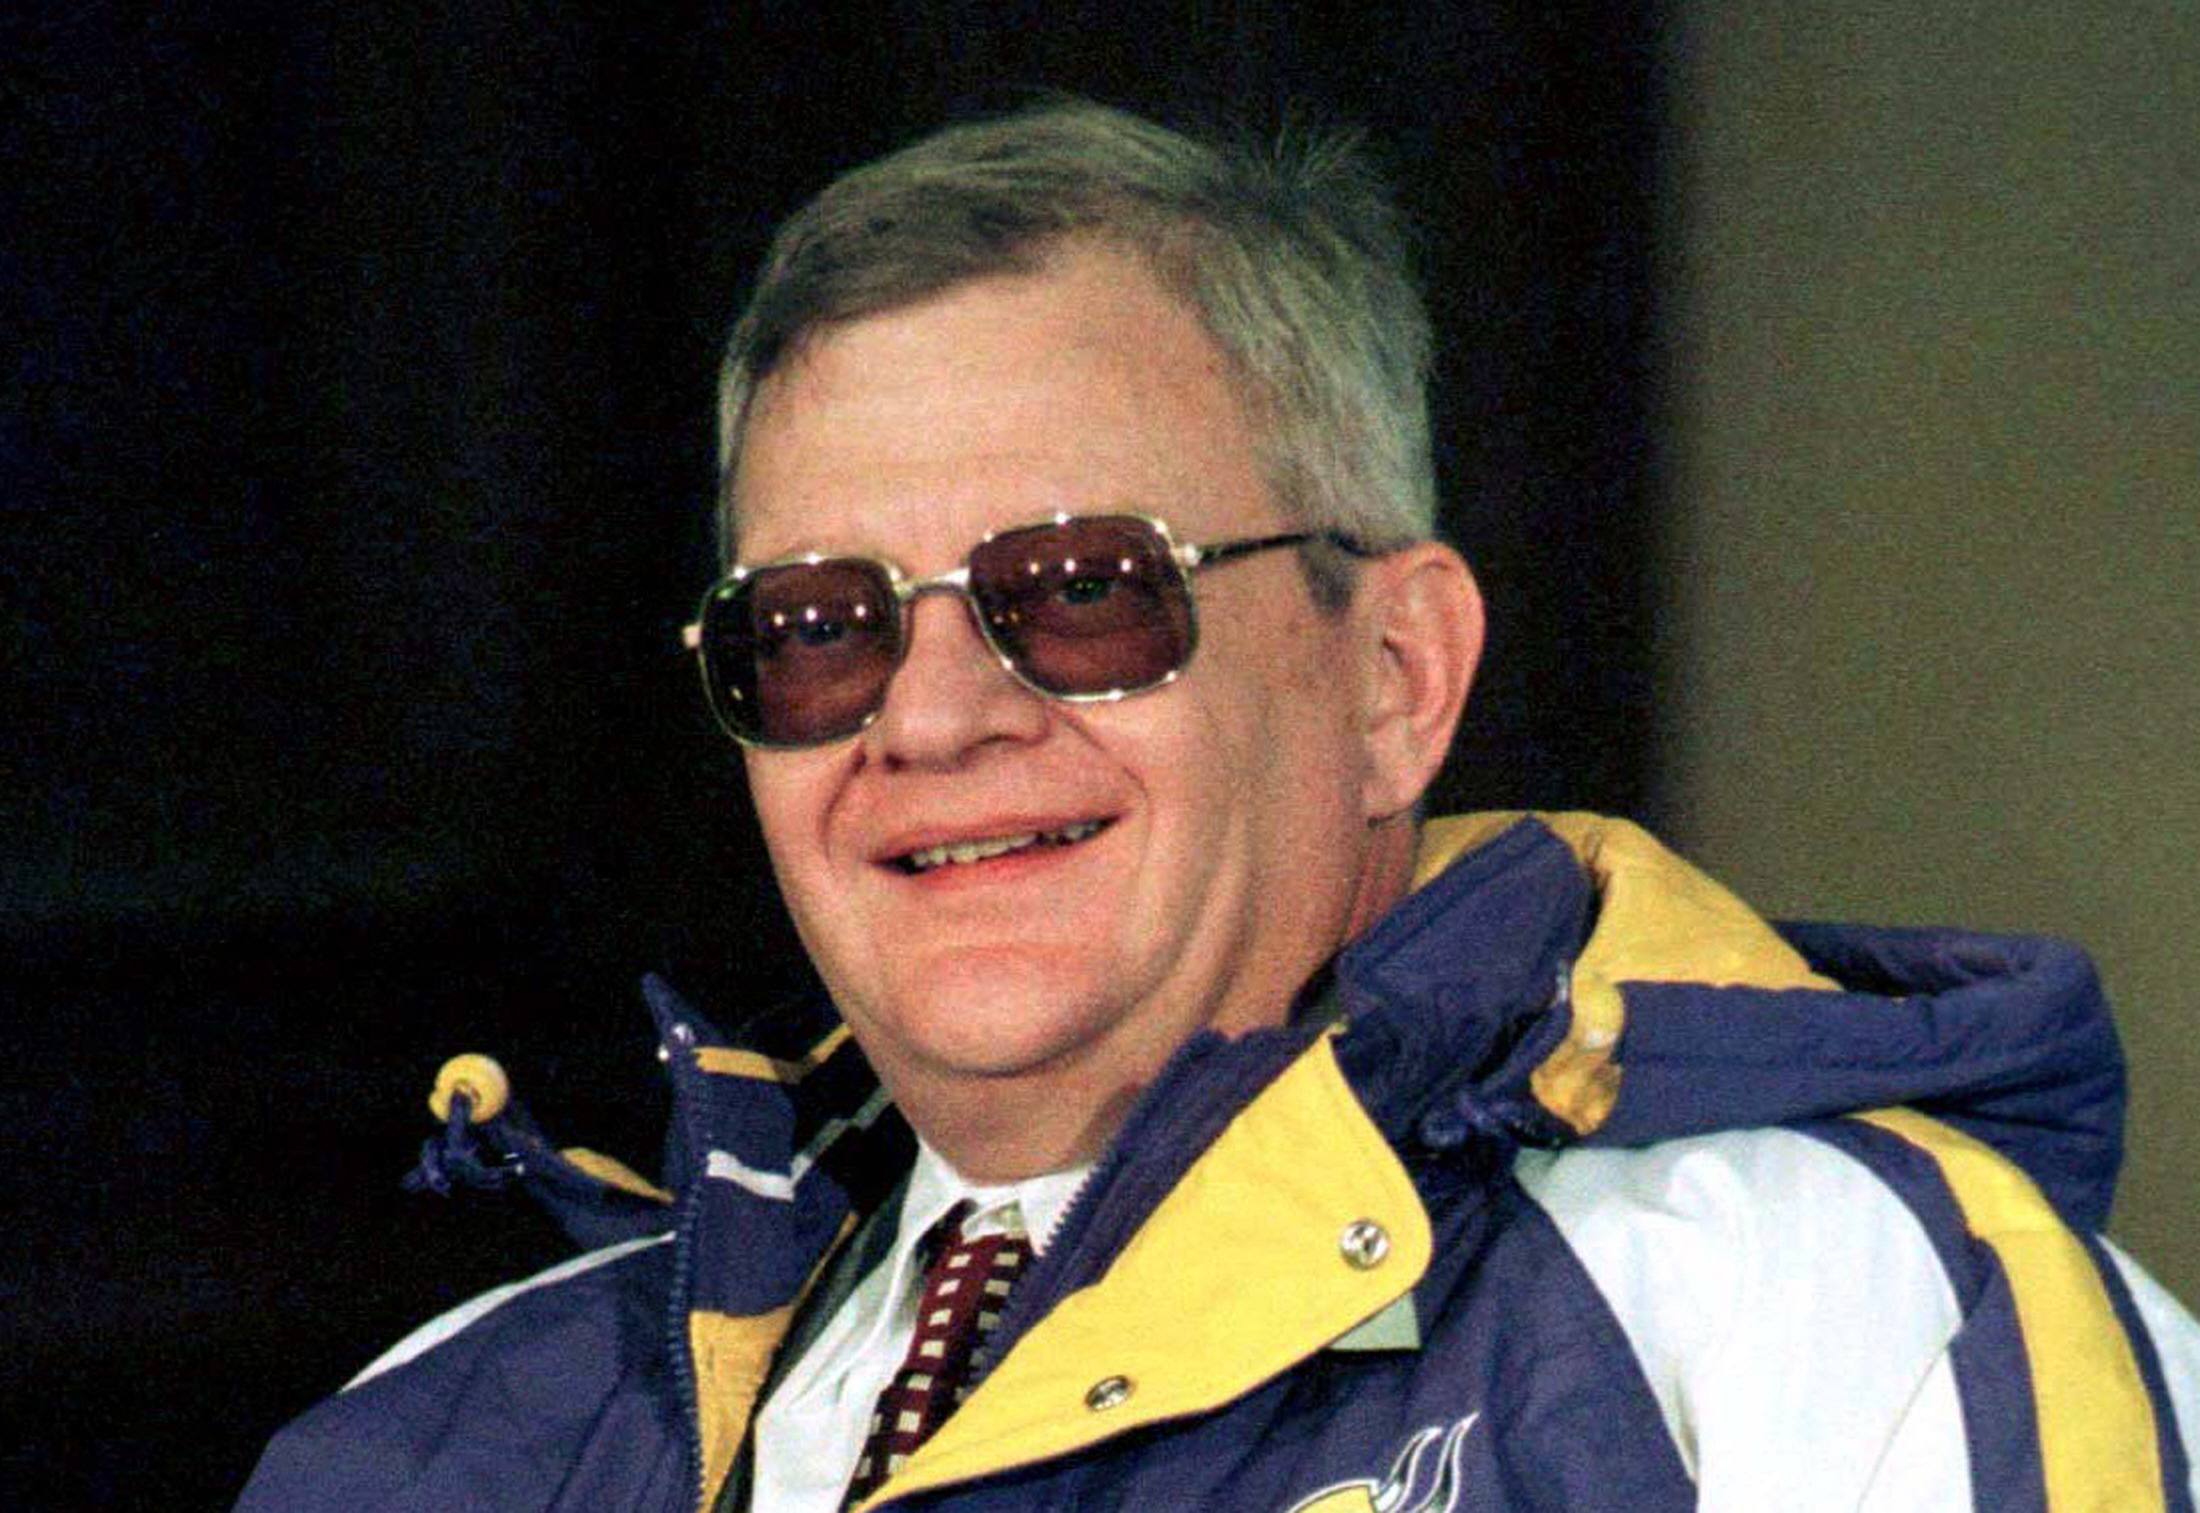 novelist tom clancy is shown in this february 5 1998 file photo photo reuters